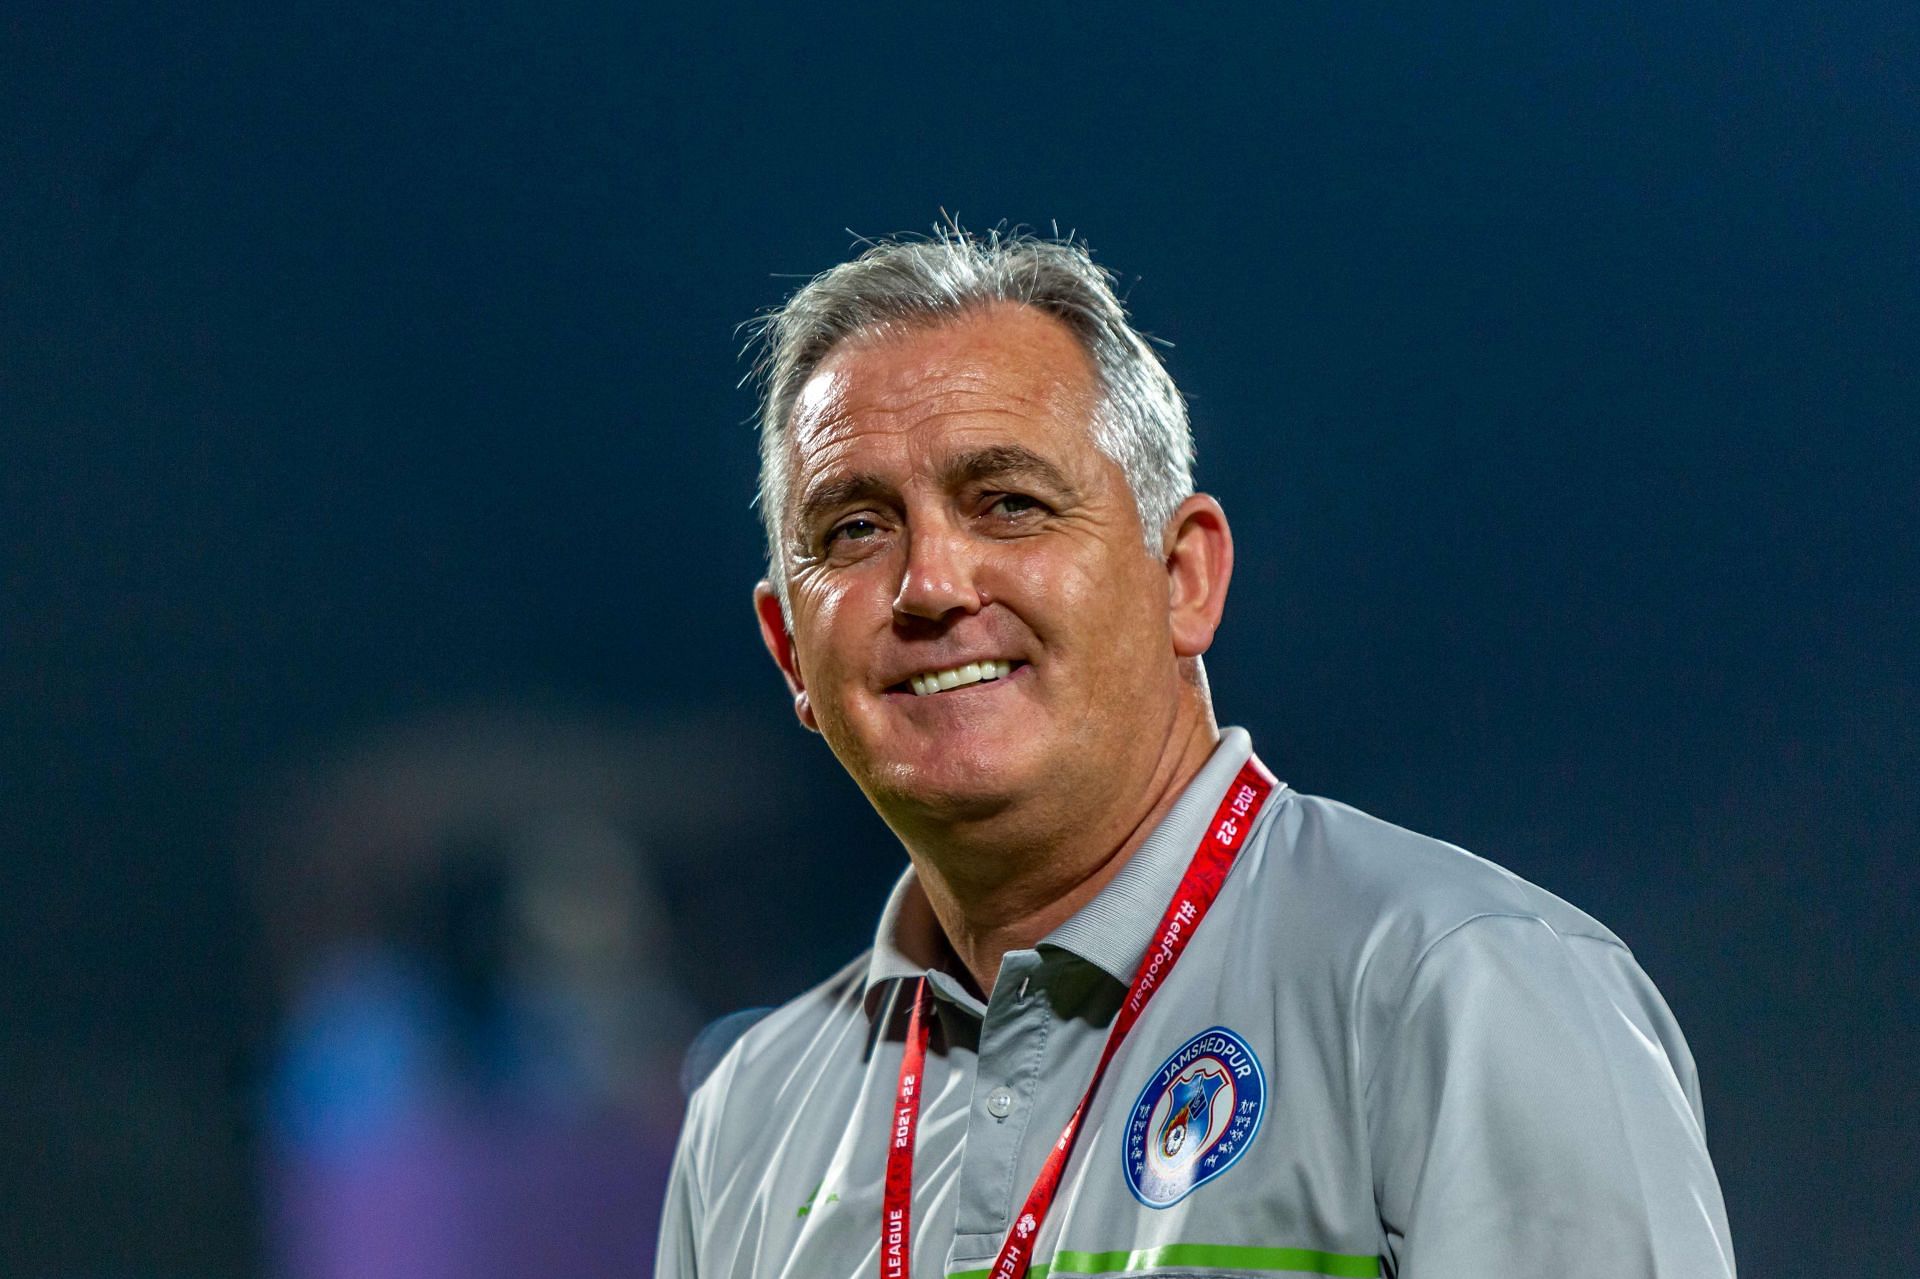 Owen Coyle led Jamshedpur FC to their maiden ISL Shield title. (Image: JFC Media)